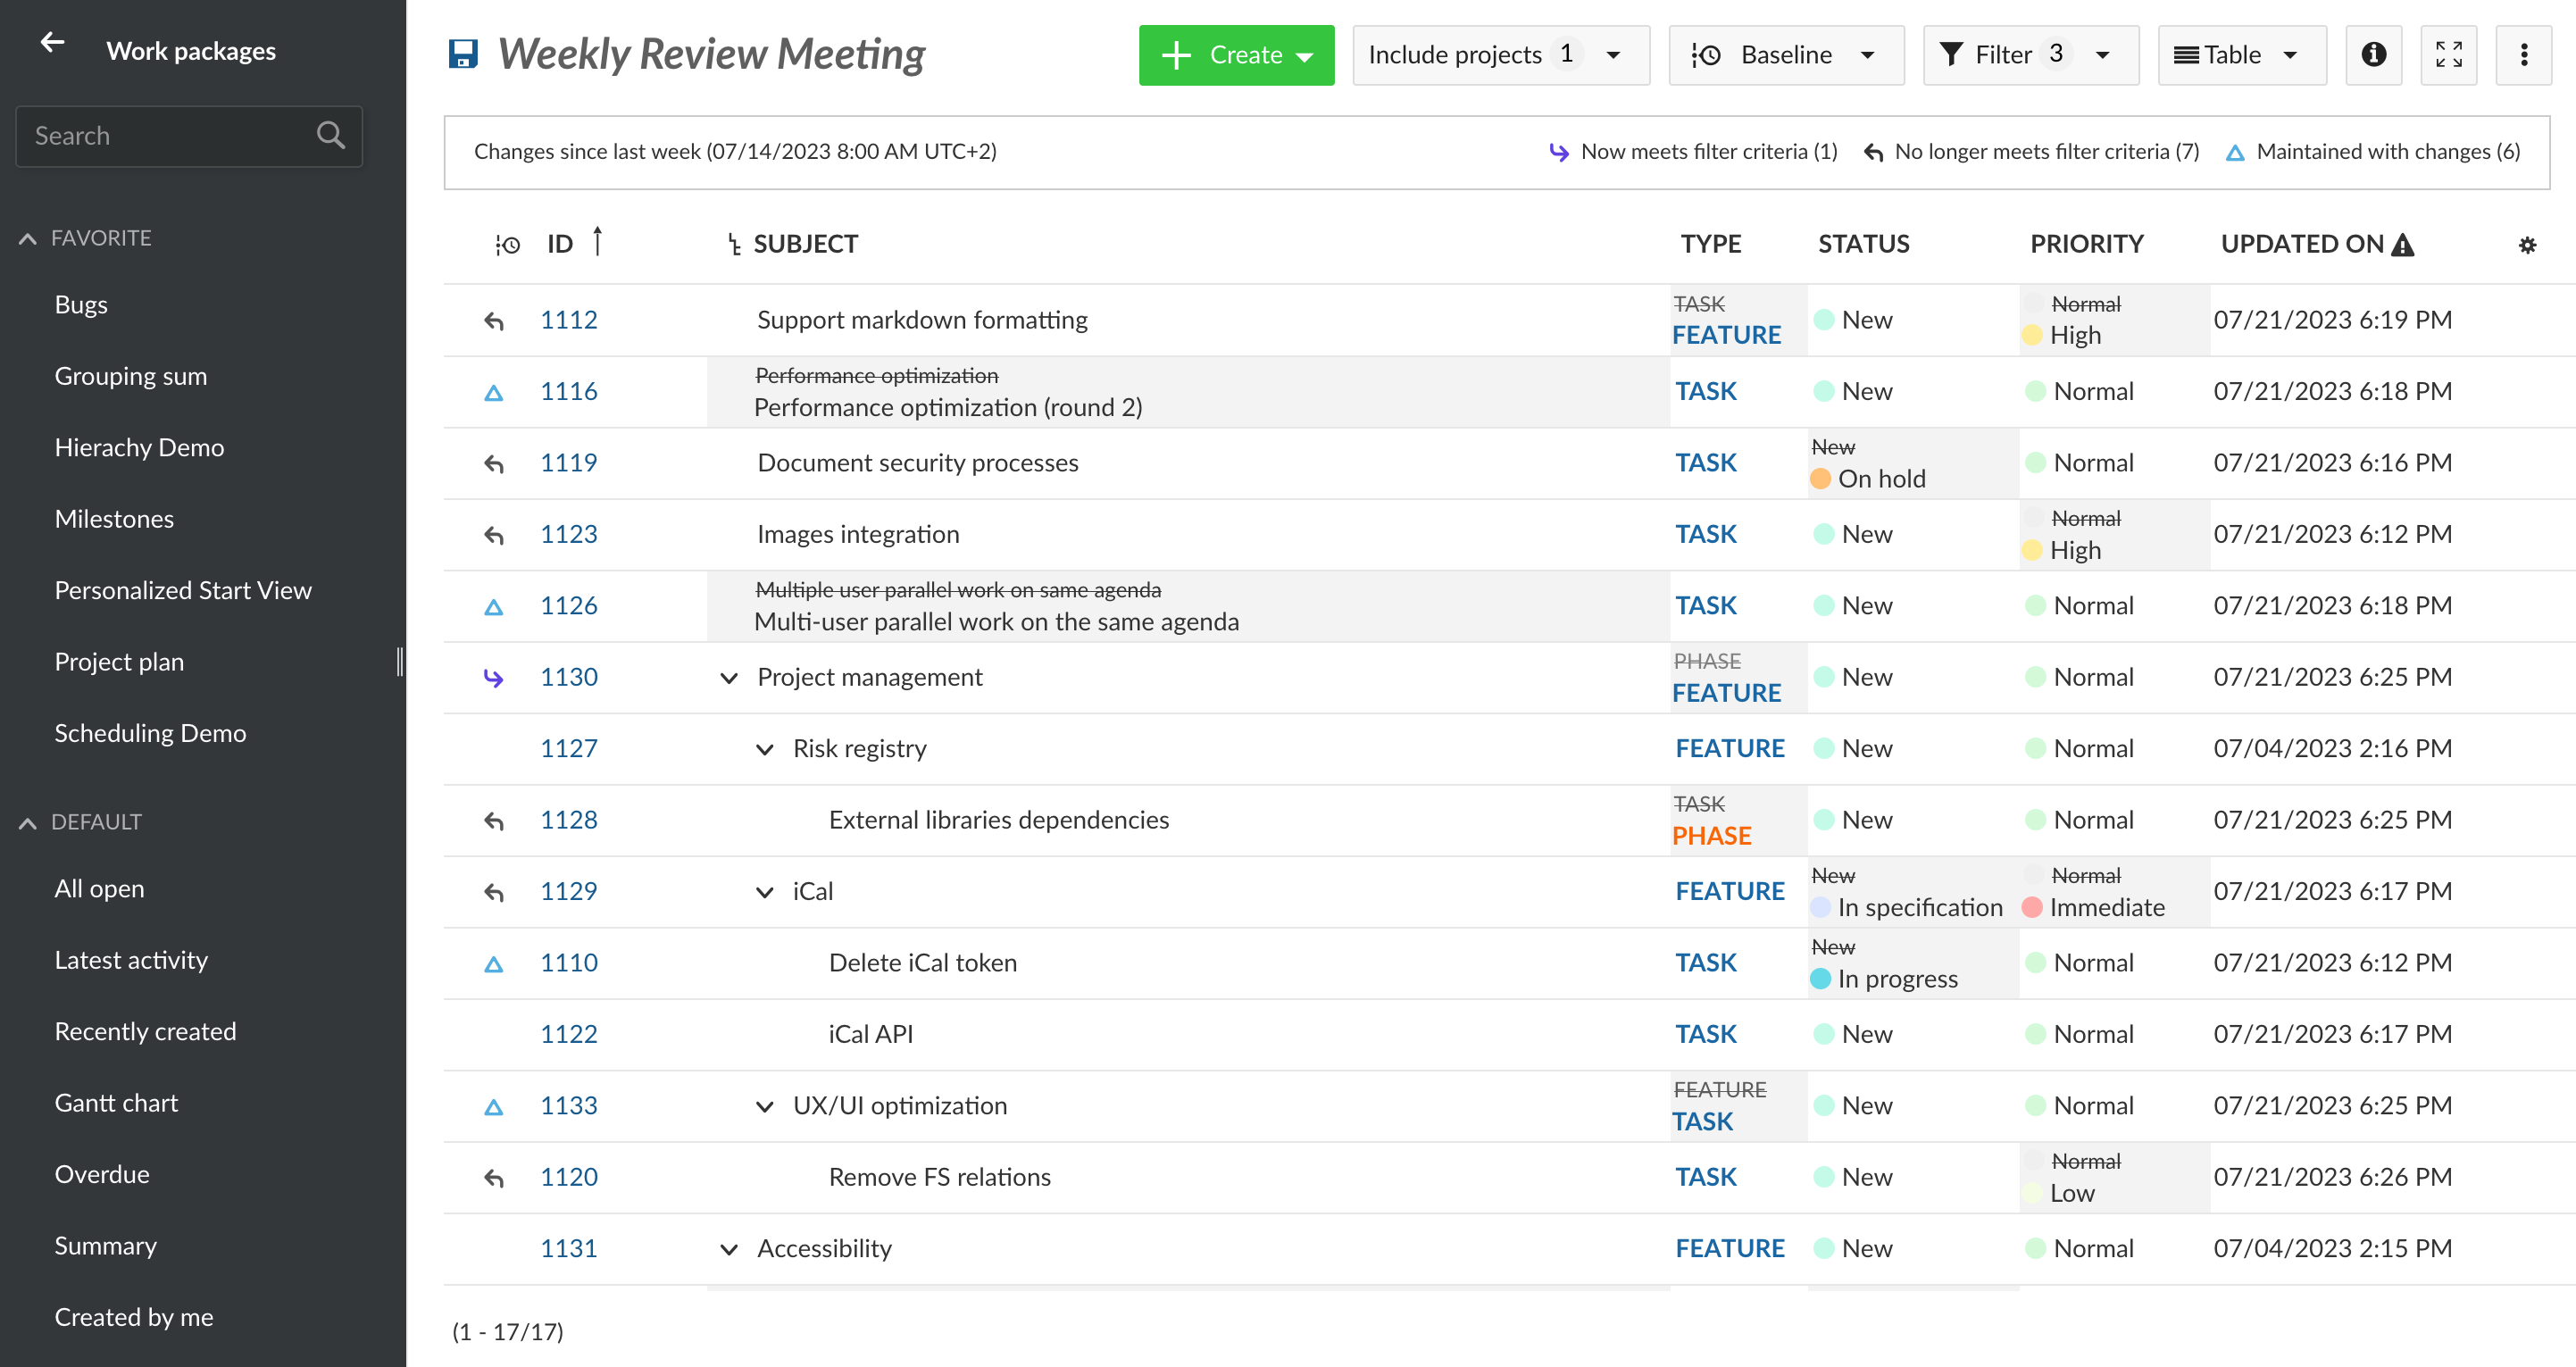 Baseline enabled showing changes to the work package table